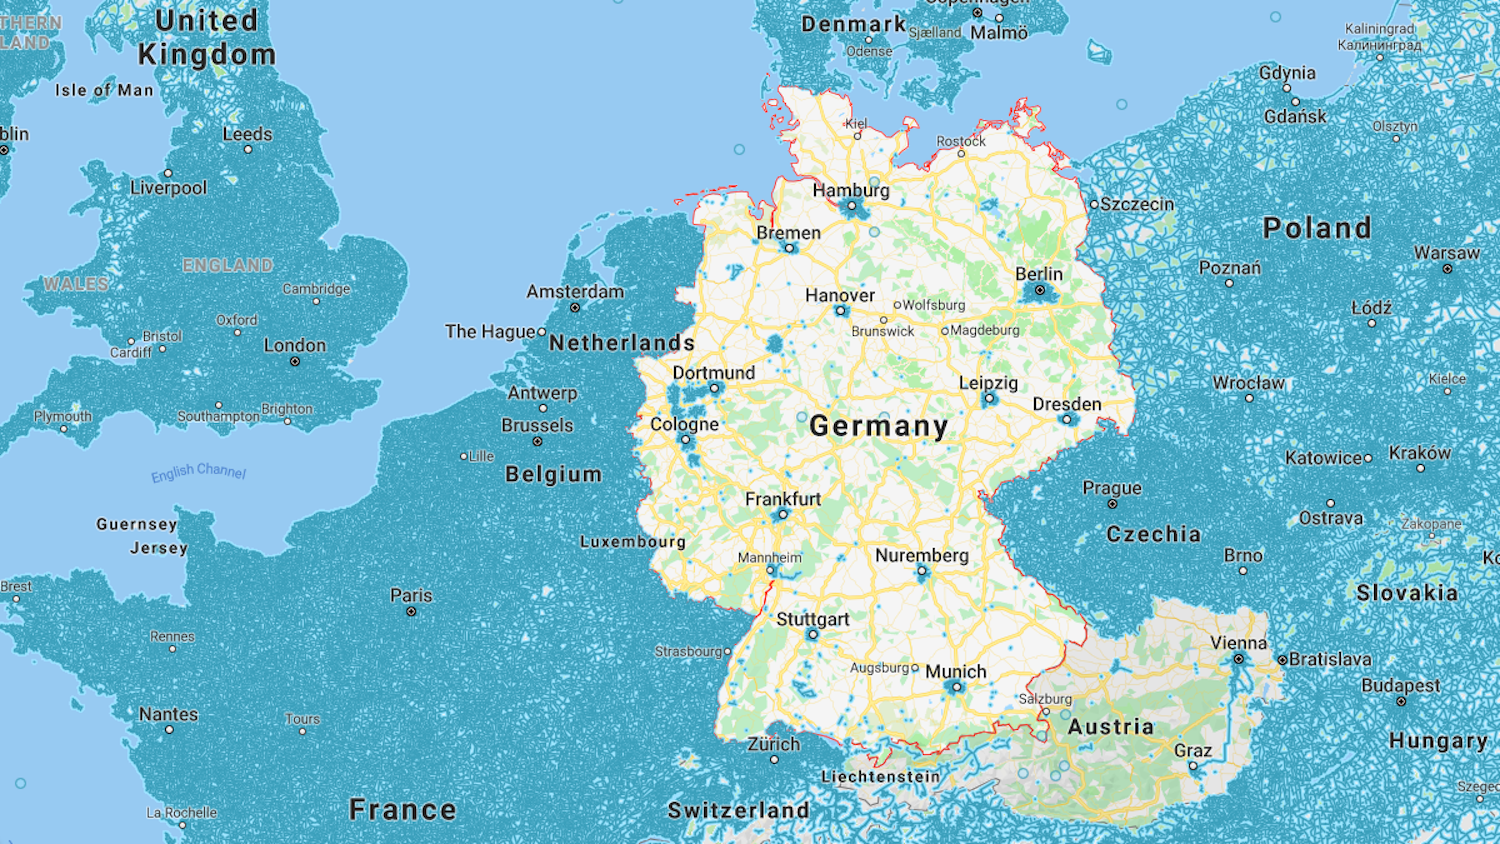 Street View Google Maps Why Germany is a blank spot on Google's Street View